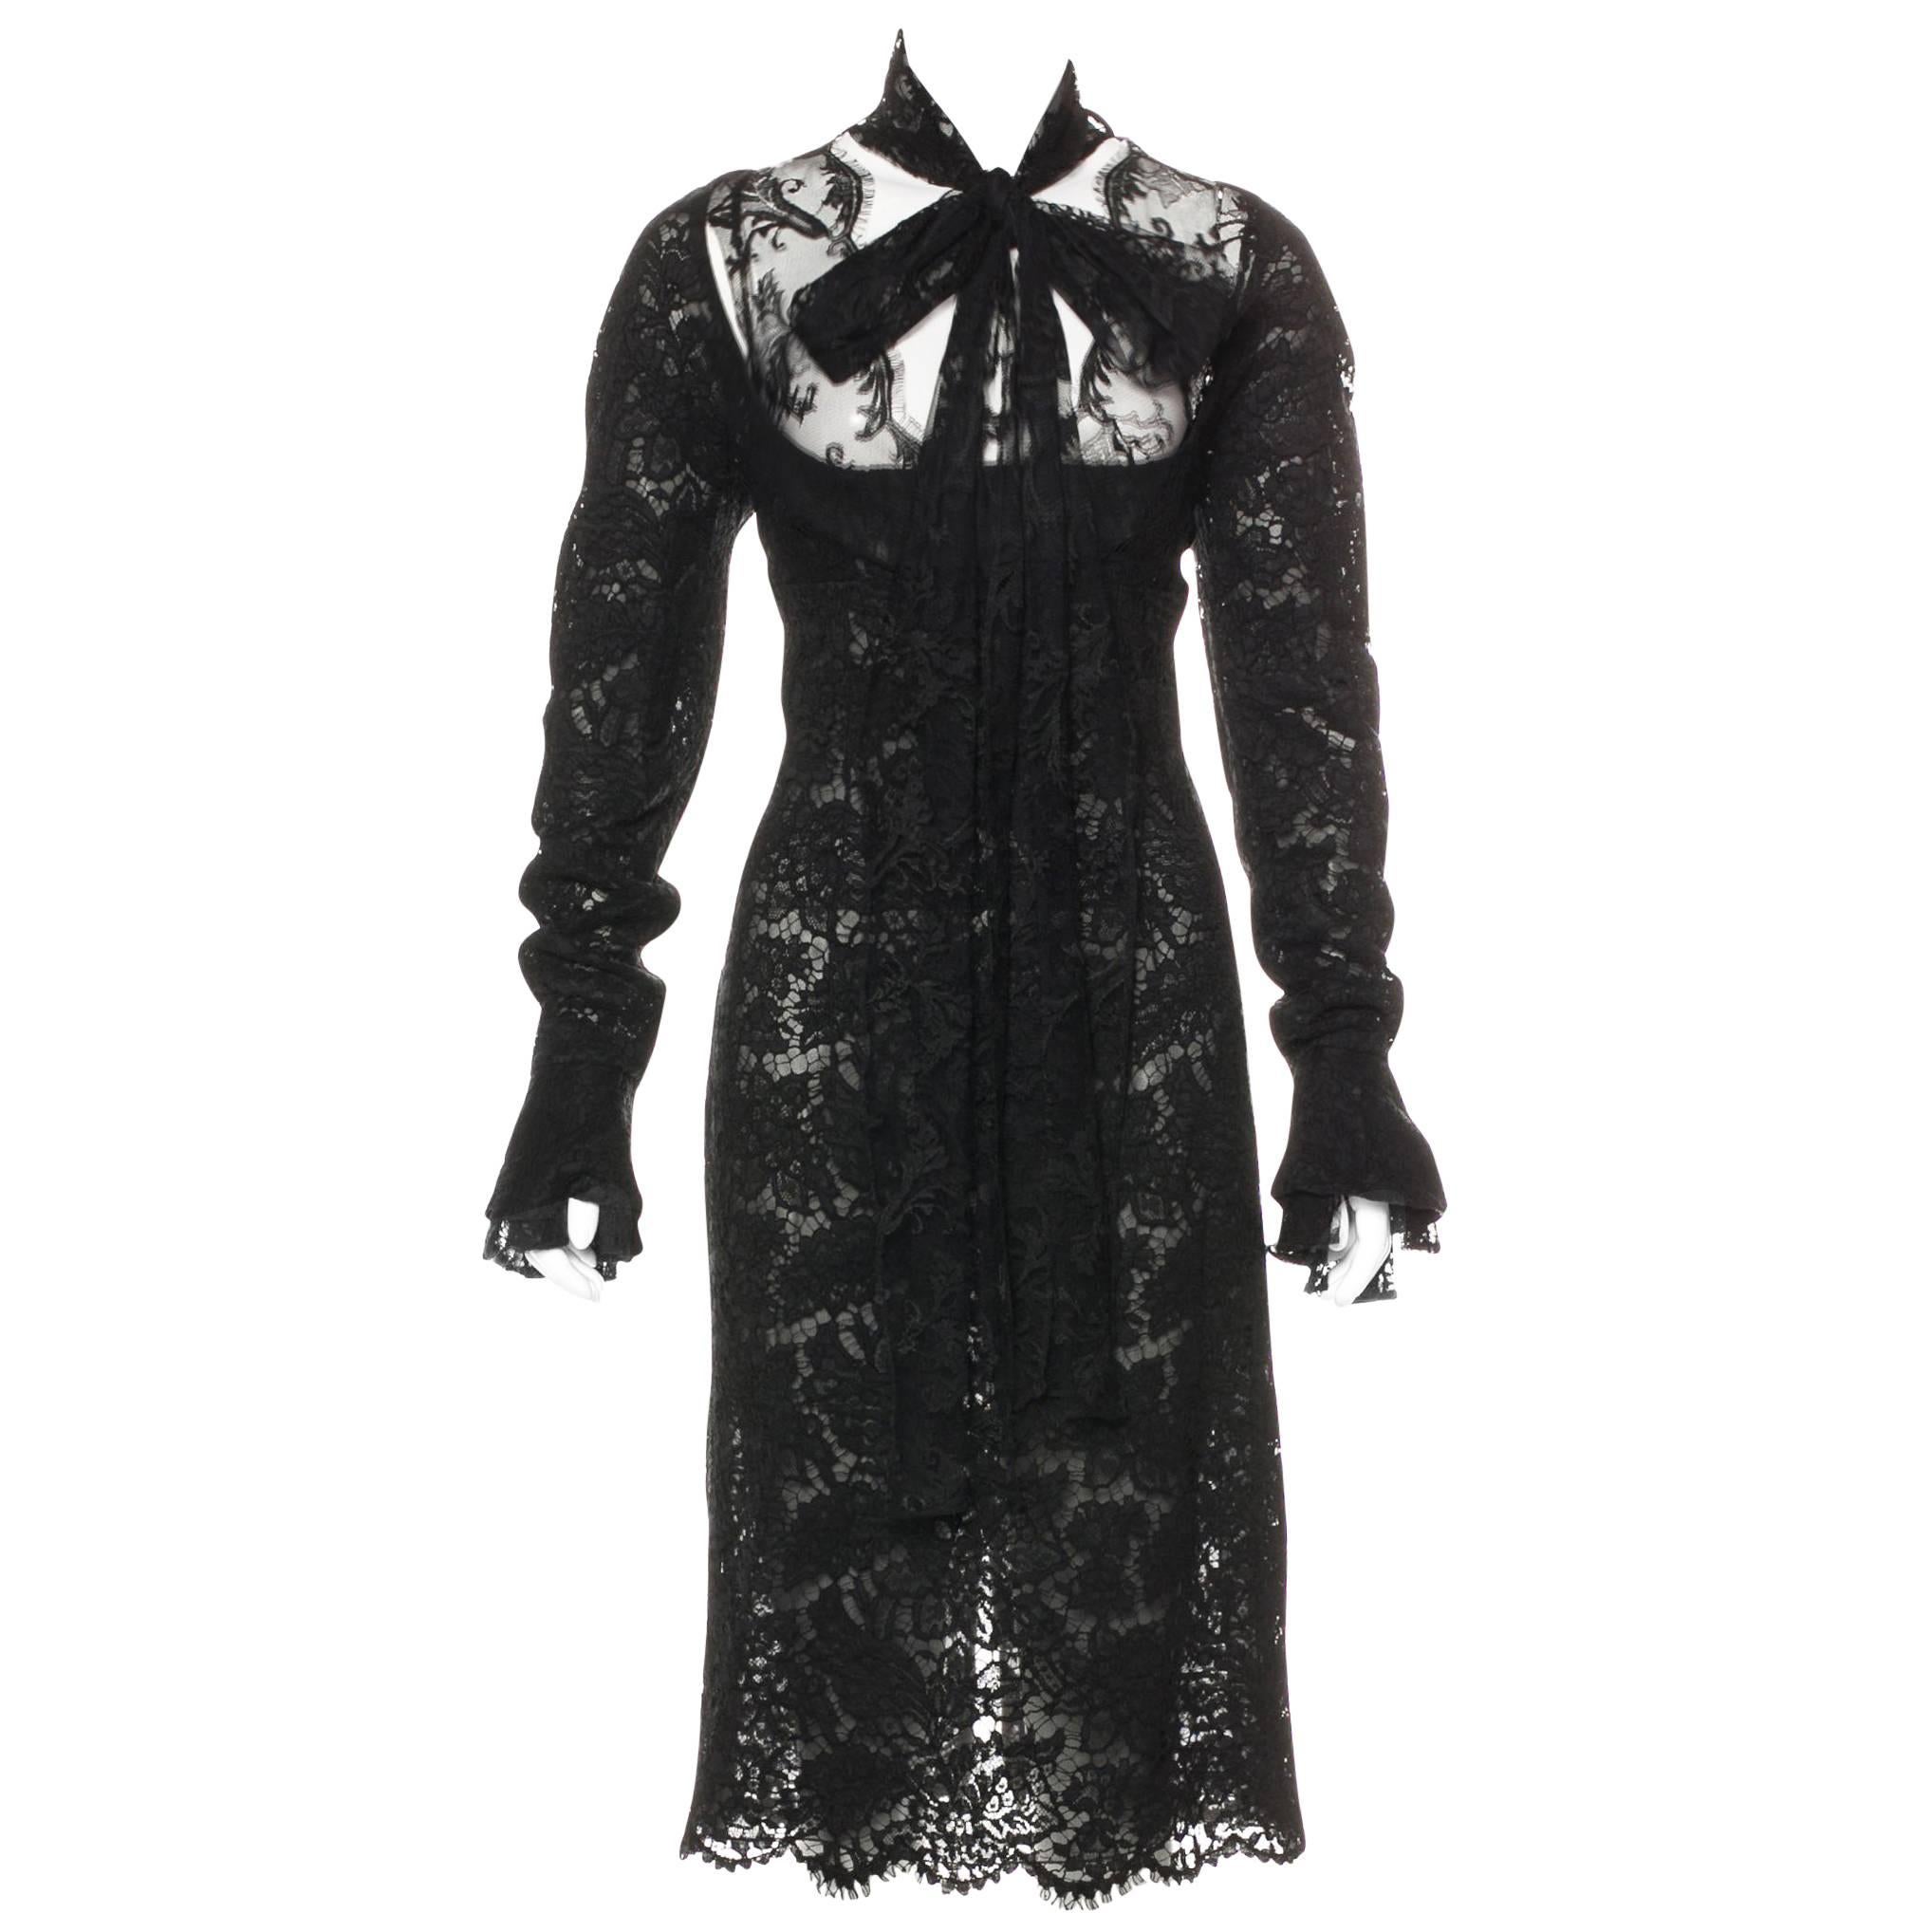 Yves Saint Laurent by Tom Ford Black Lace Cocktail Dress with Scarf Ties For Sale